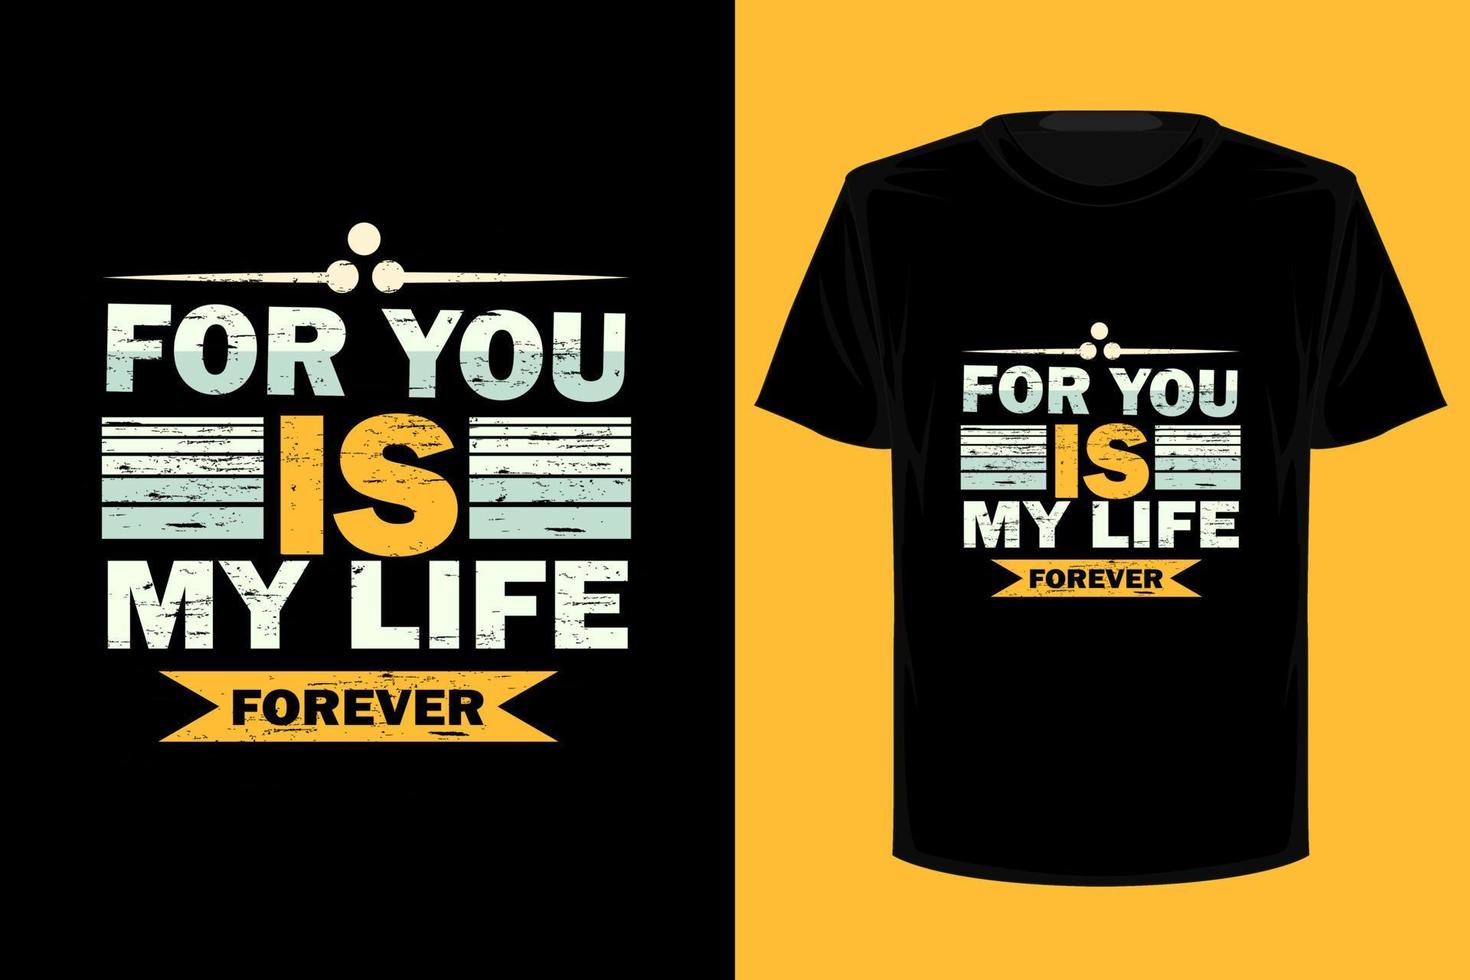 For you is my life retro vintage t shirt design vector